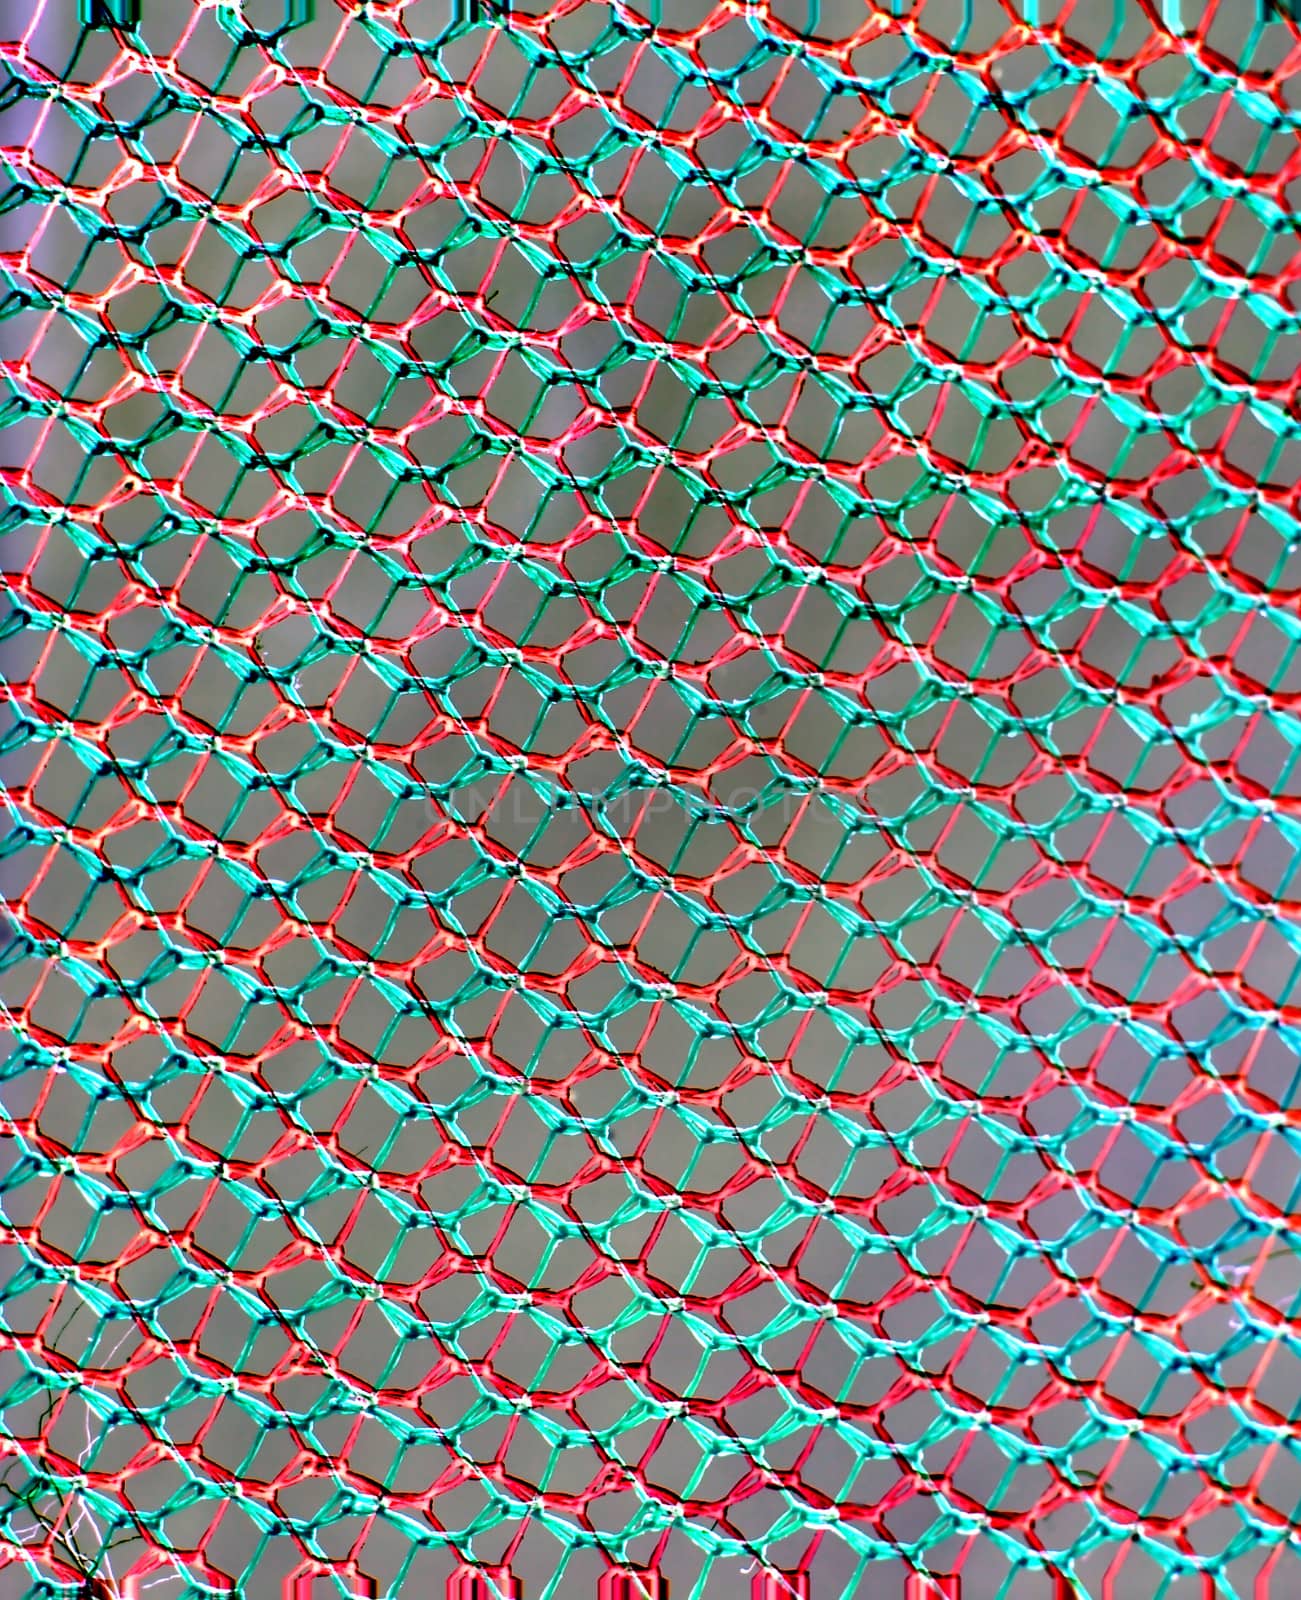 abstraction in the form of a multicolored grid of cells on a gray background